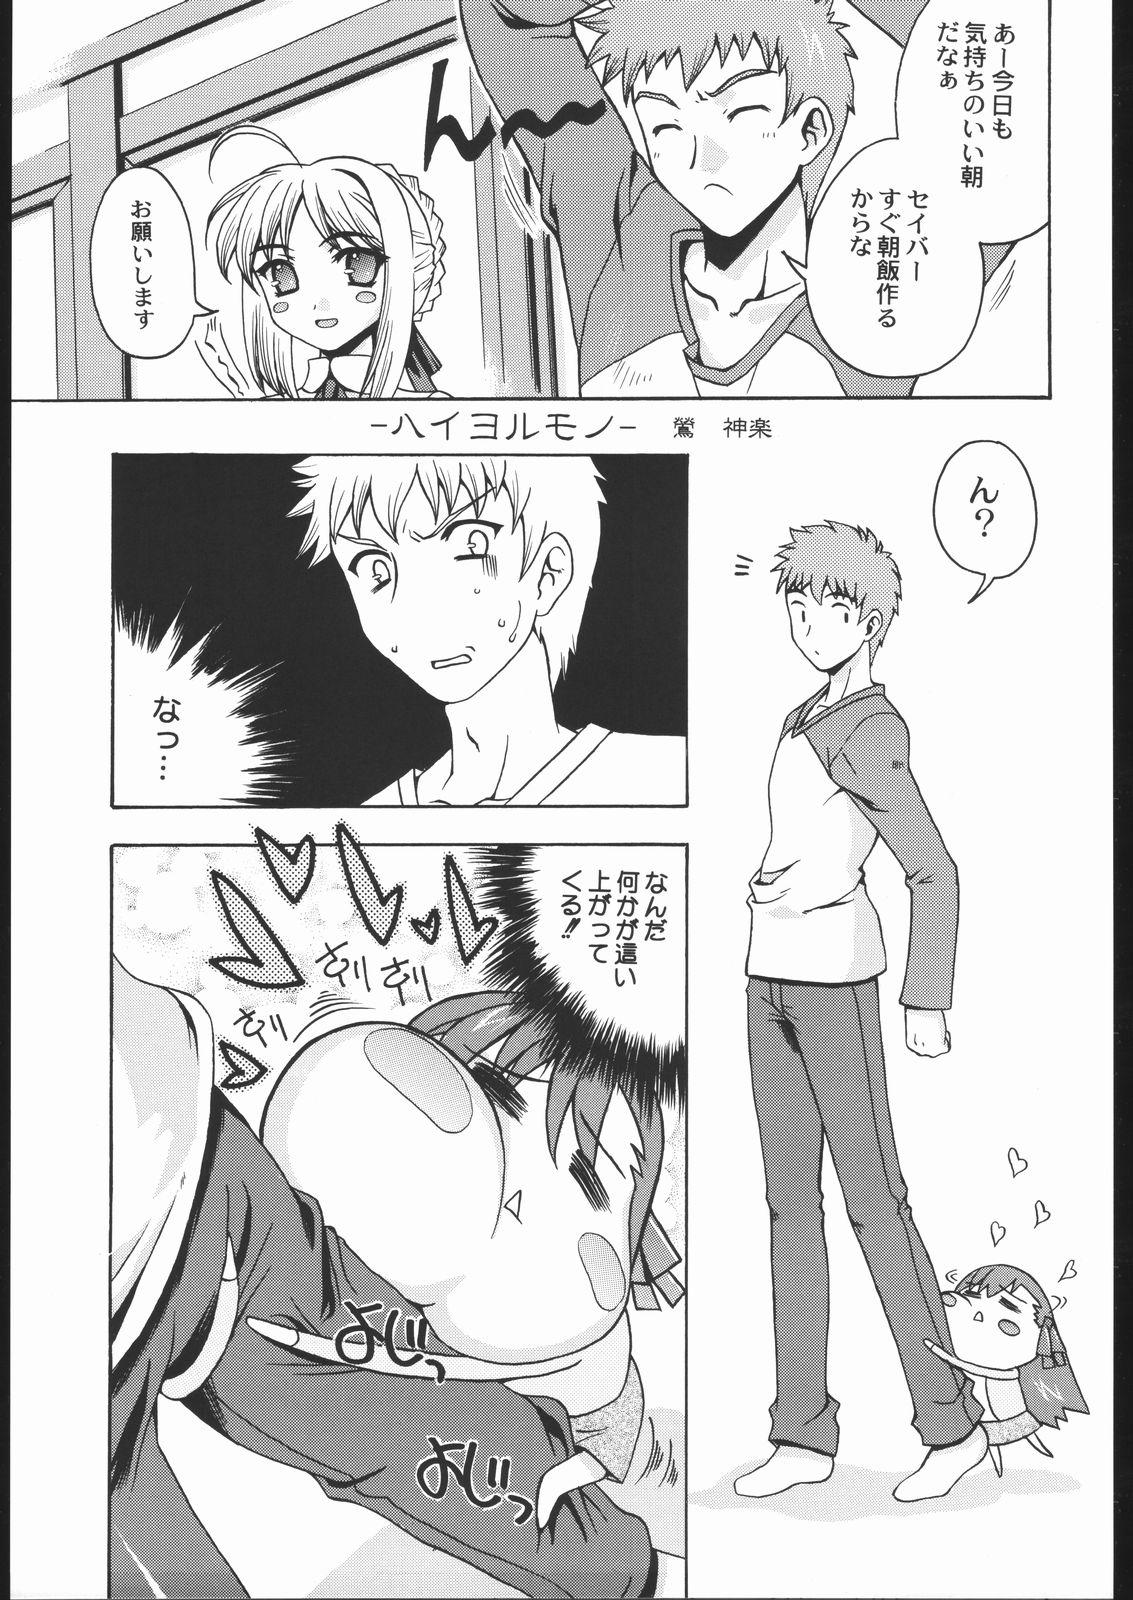 Oral Sex Going My Way - Fate stay night Bath - Page 4